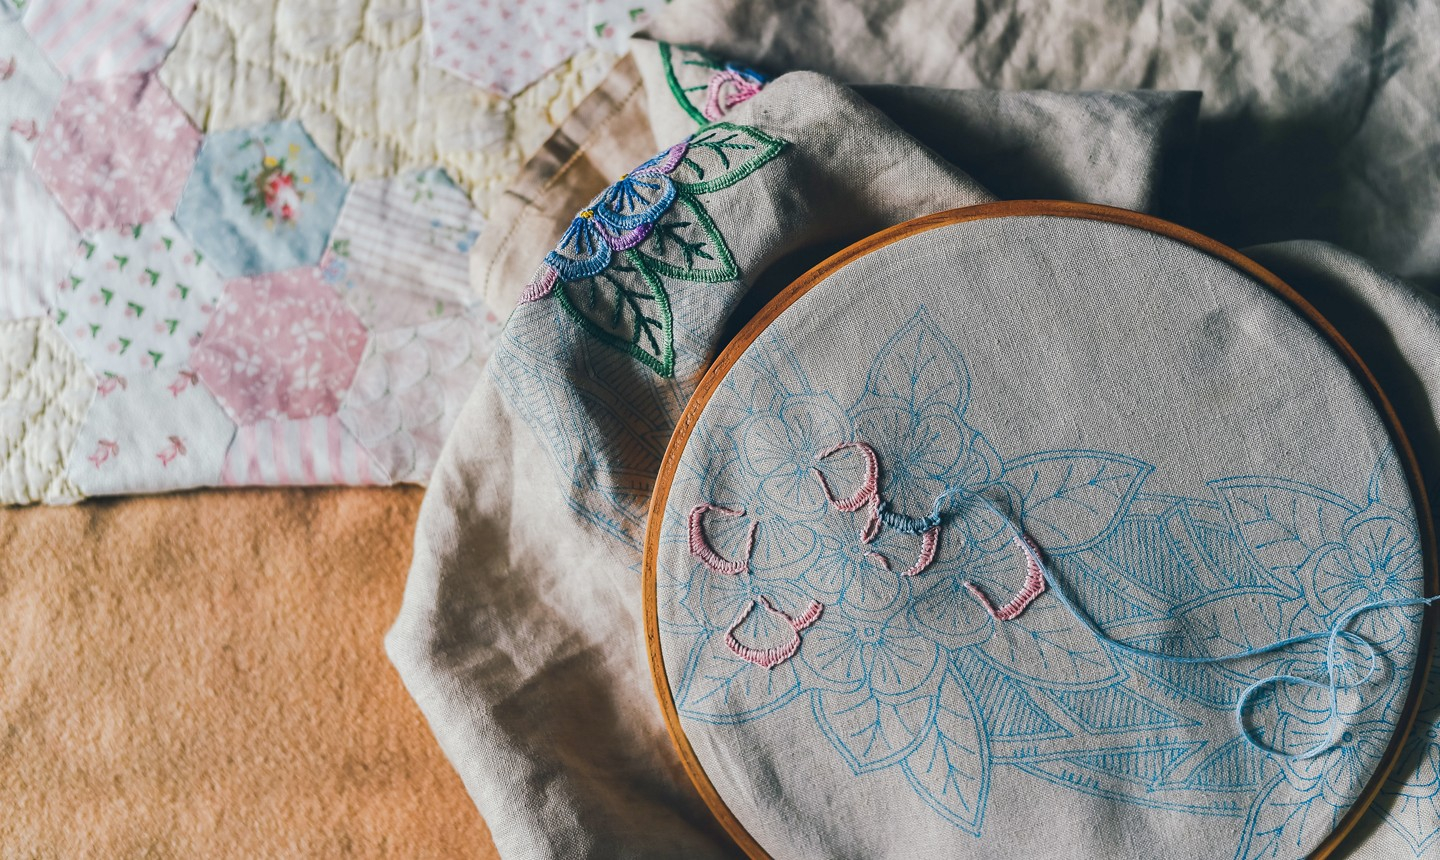 How To Make Embroidery Patterns 5 Simple Ways To Transfer Embroidery Designs